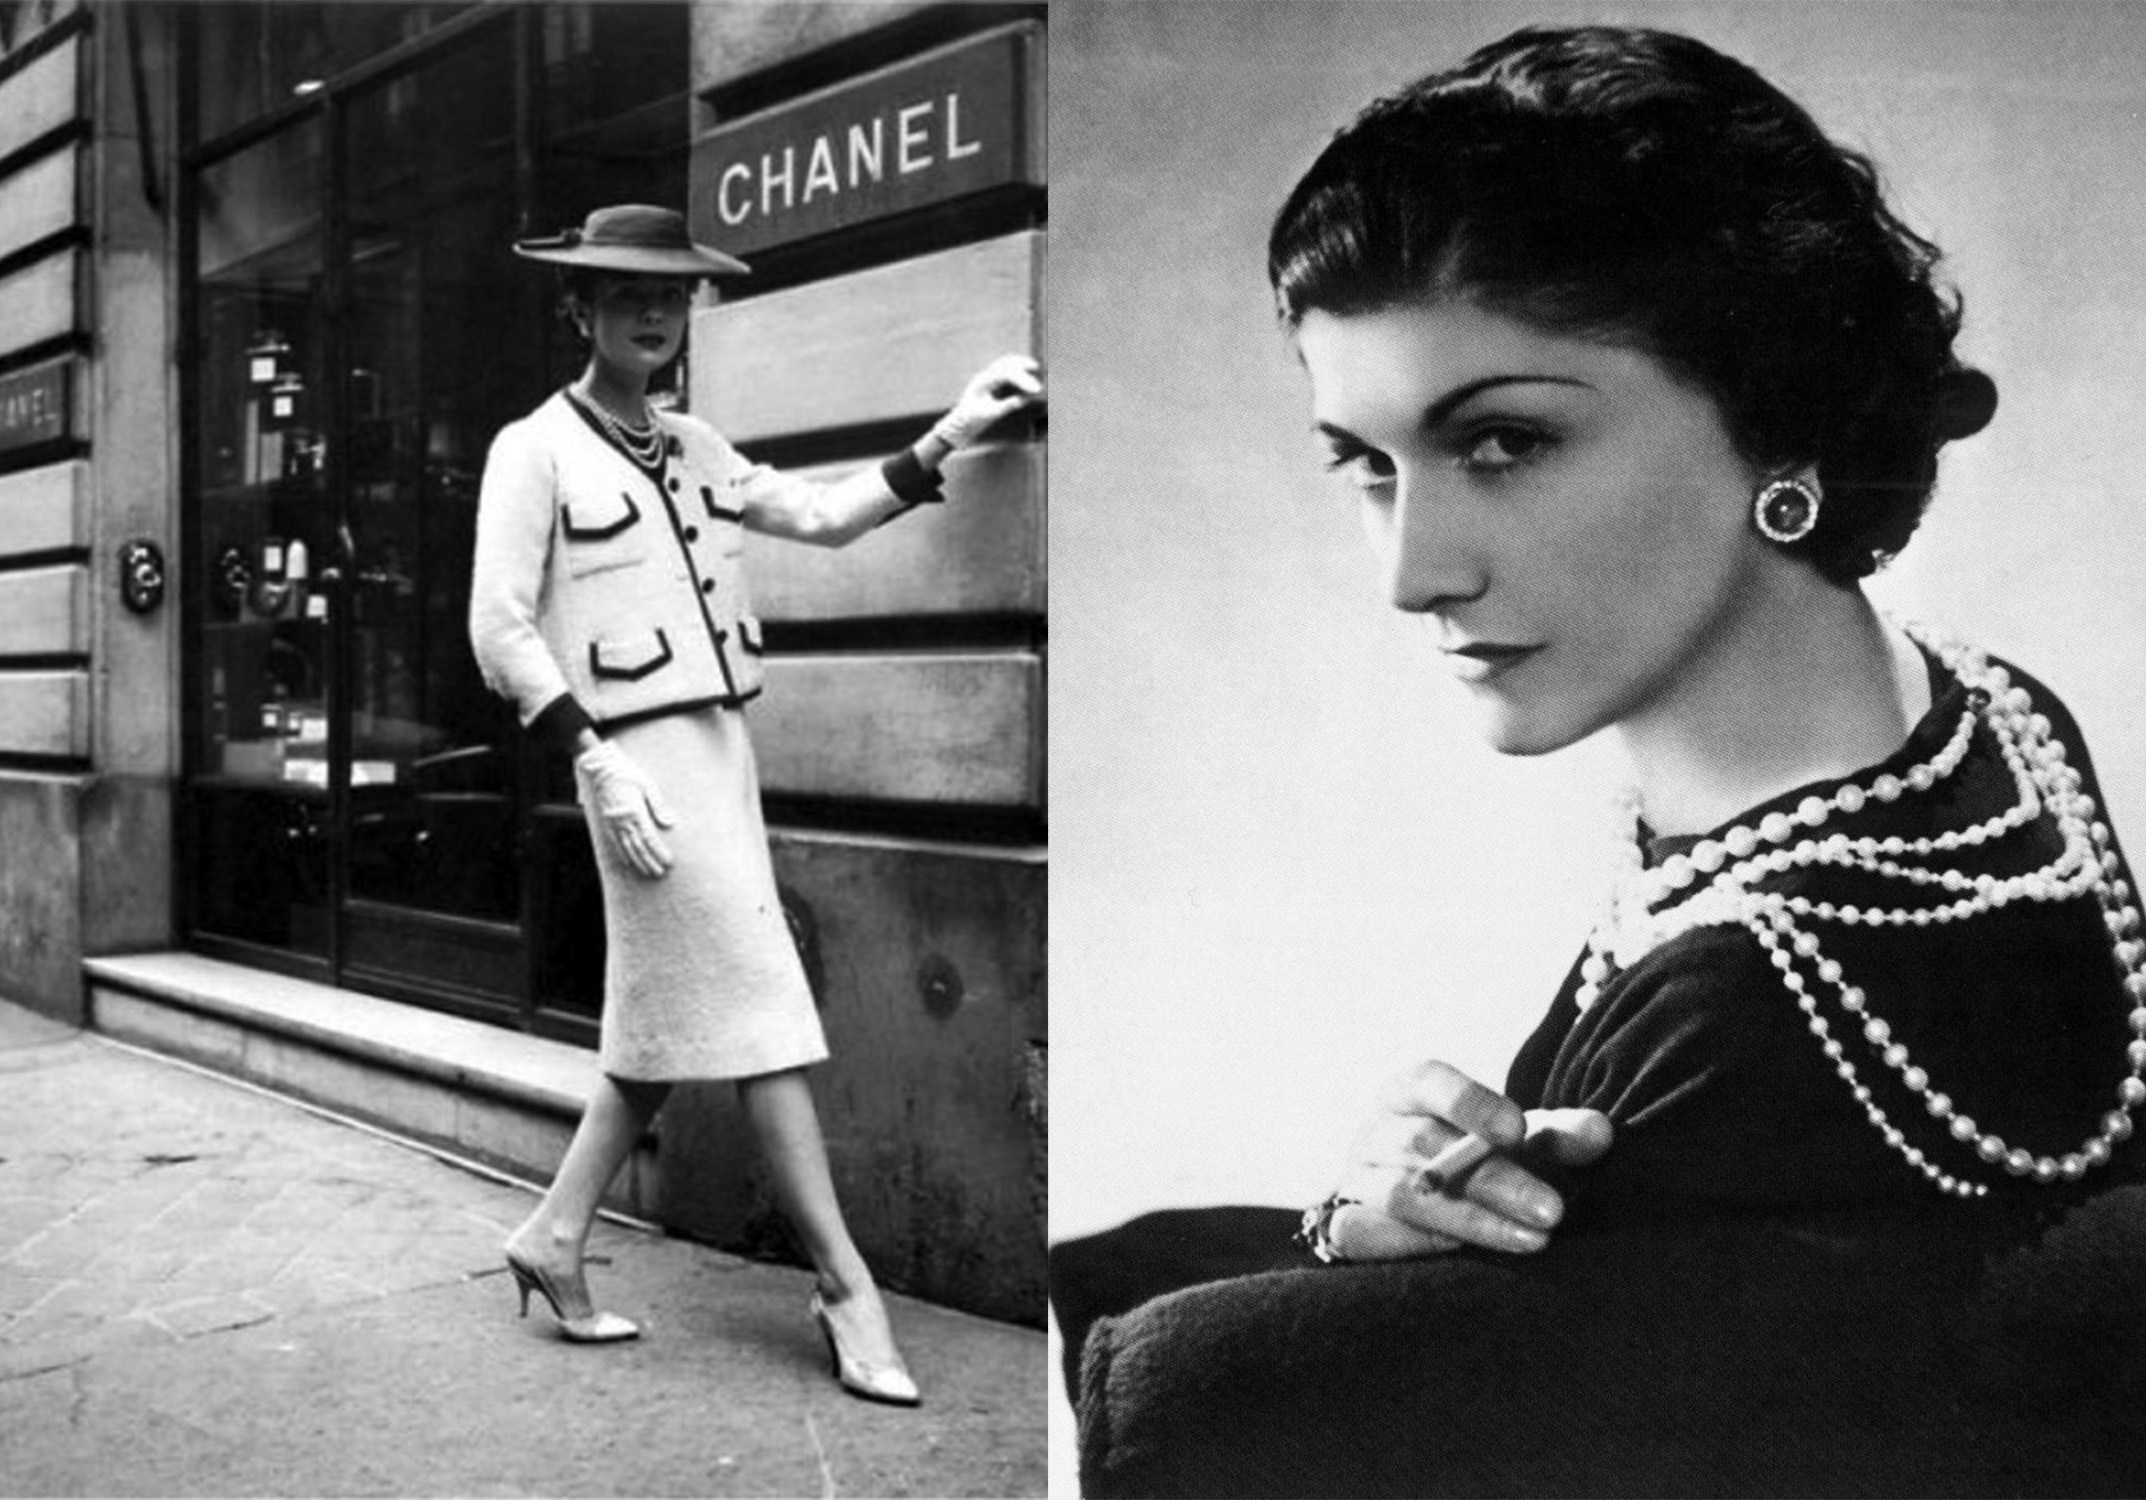 Coco Chanel Biography Claims She Was a Nazi Spy  The Hollywood Reporter